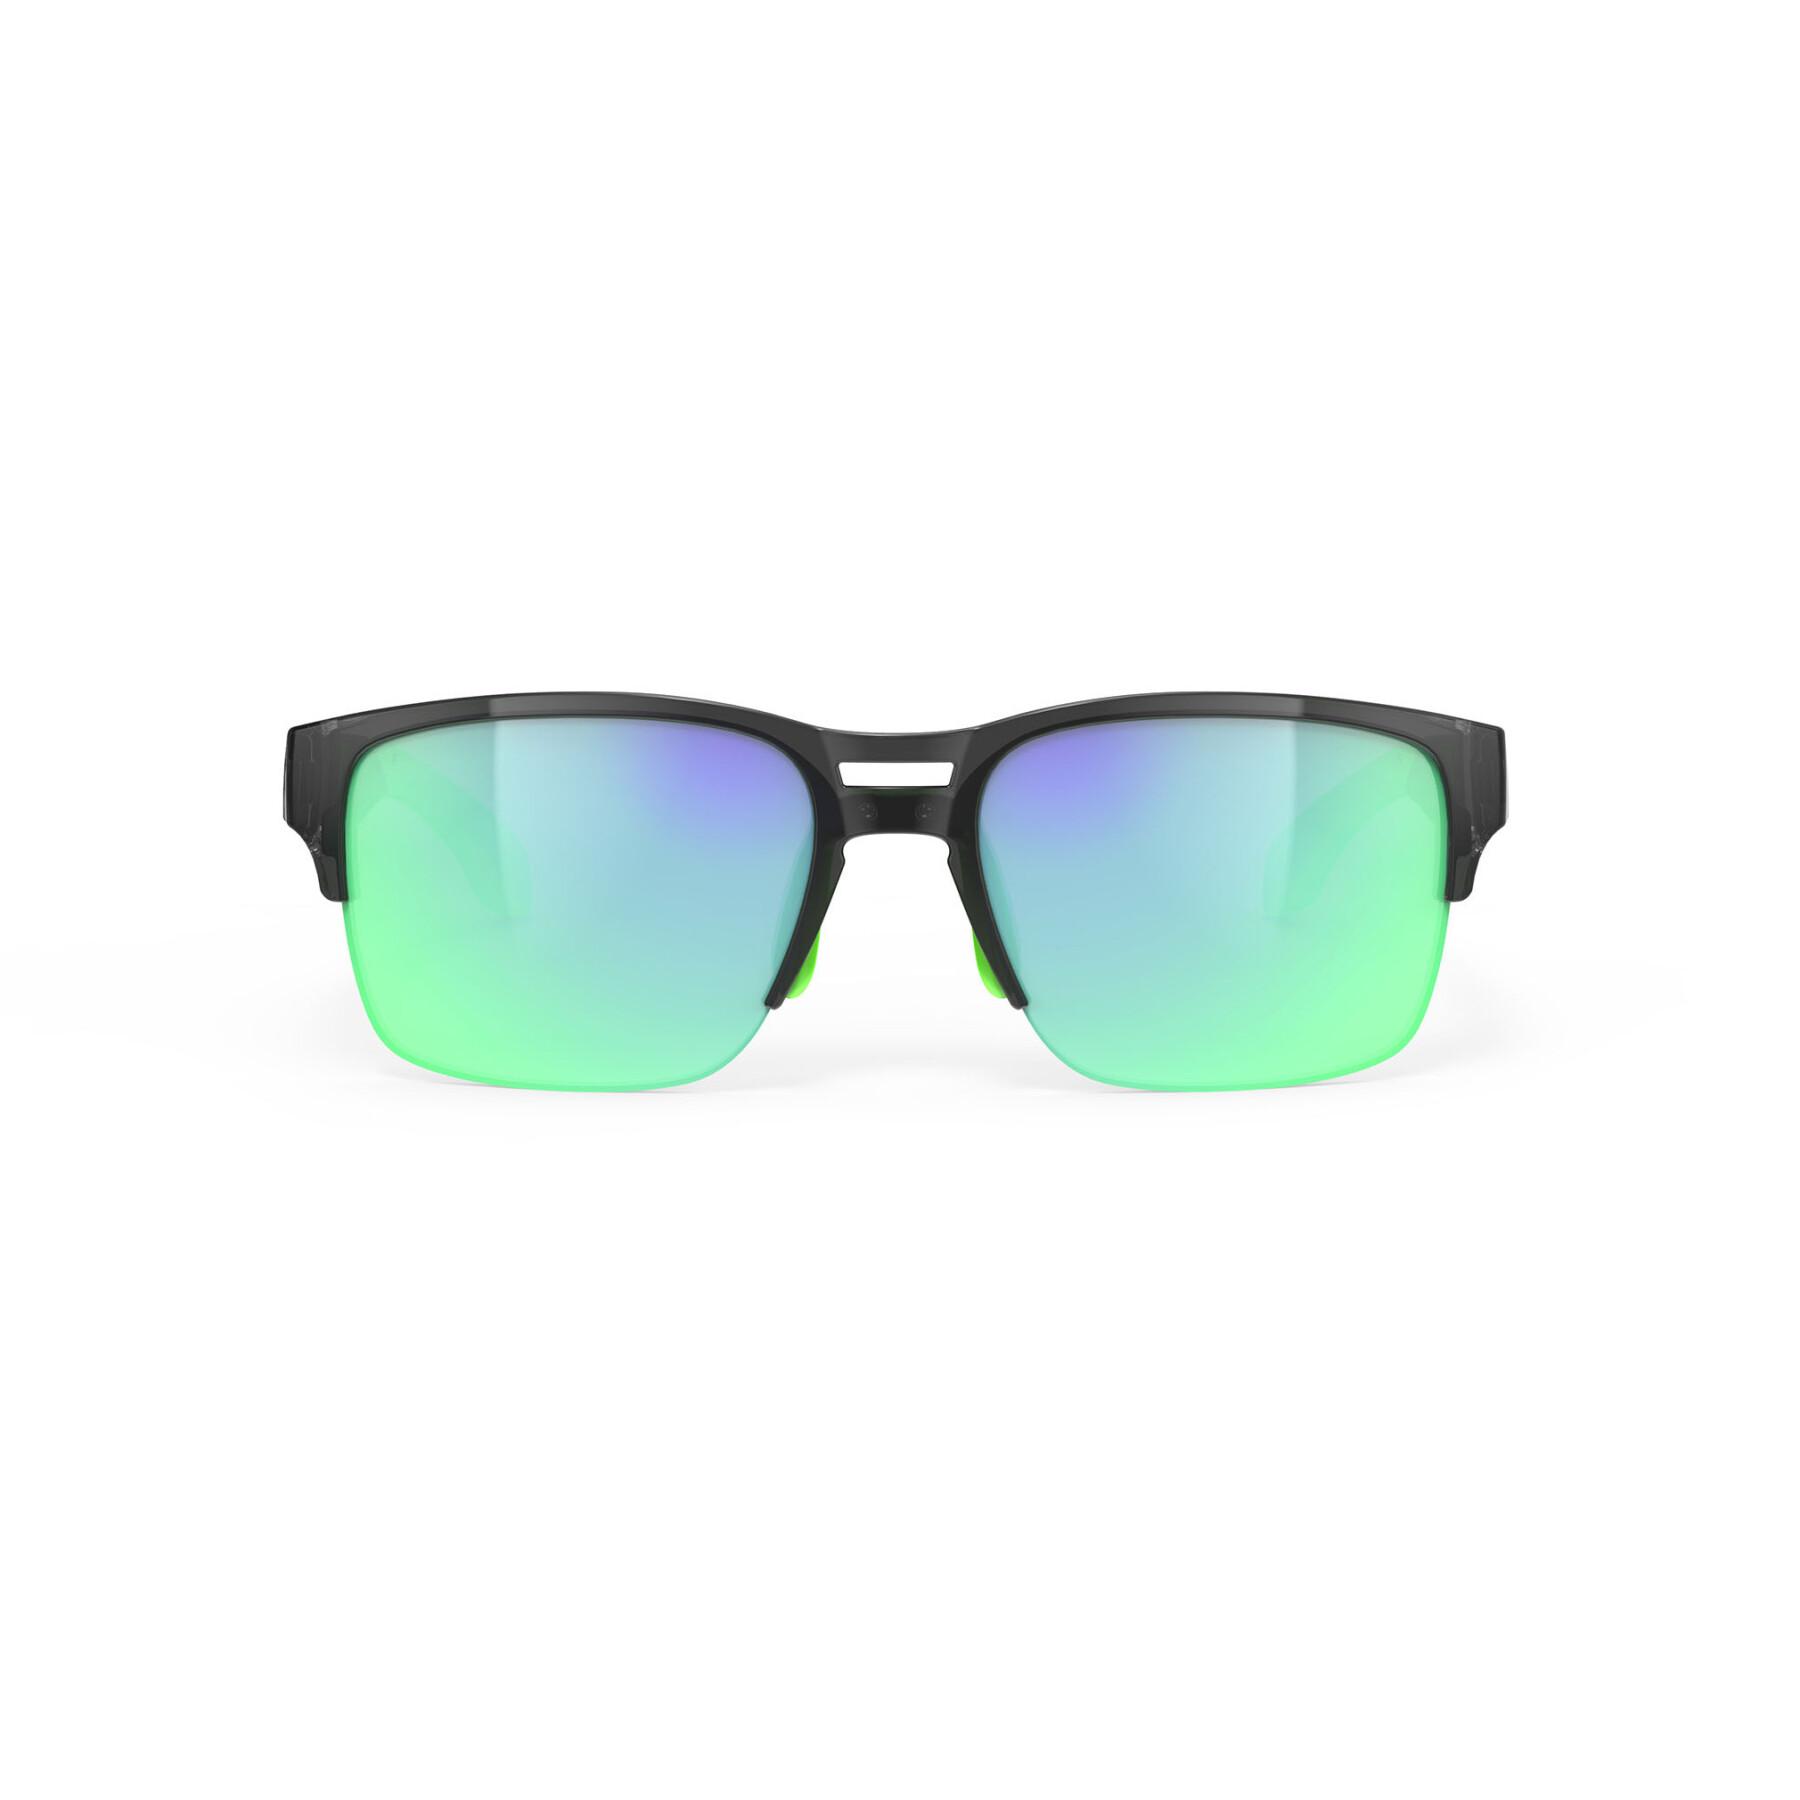 Sonnenbrille Rudy Project spinair 58 water sports